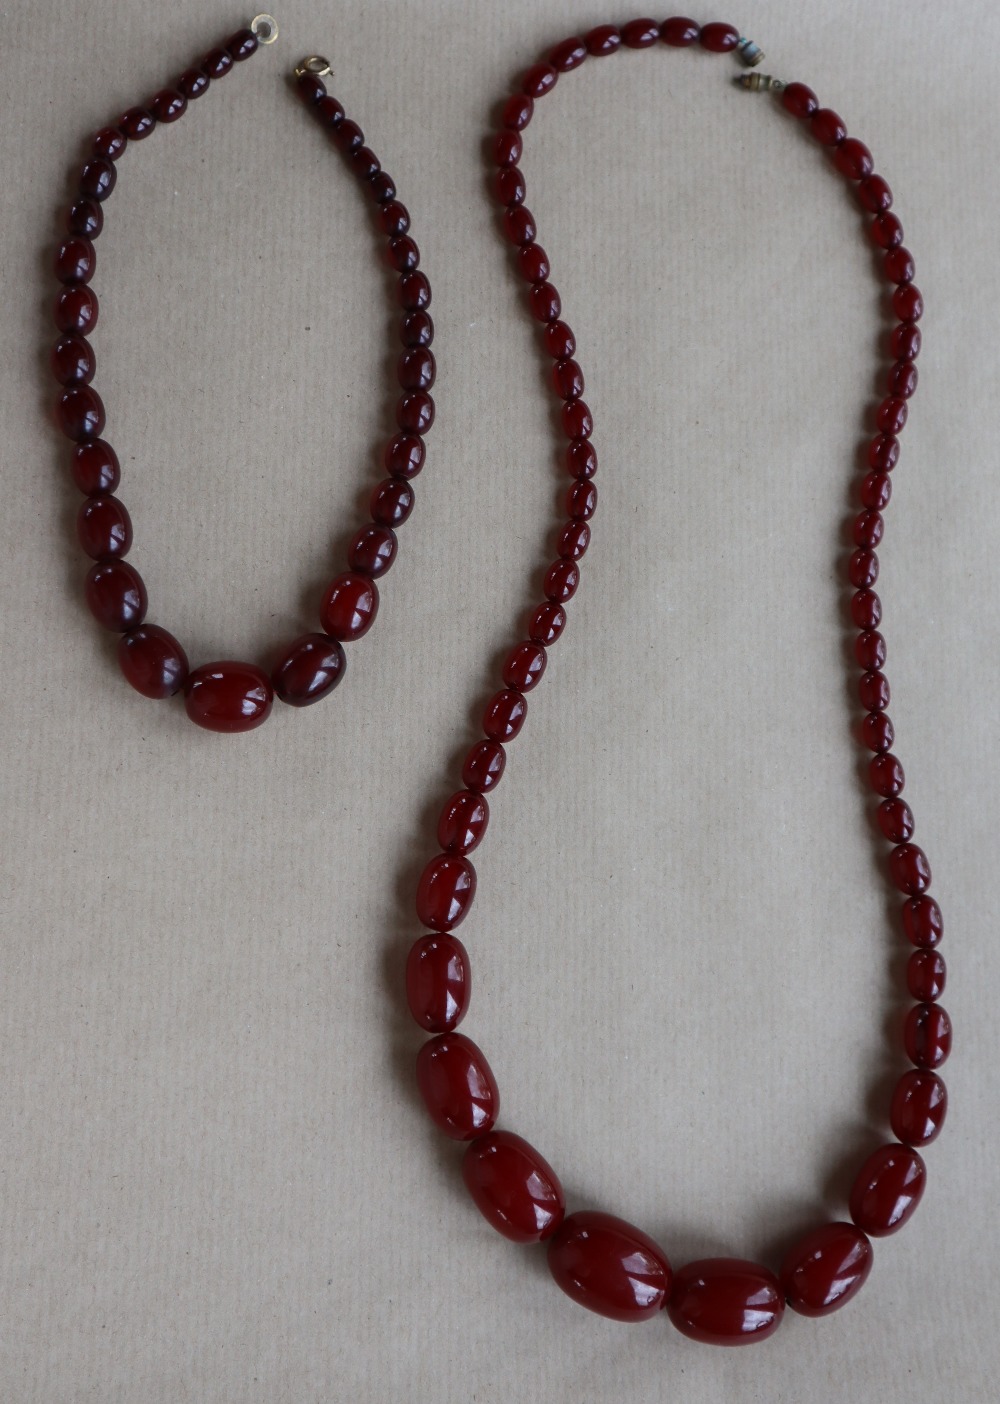 Two Cherry Amber / bakelite bead necklaces, ranging in size from 30mm to 10mm, 79cm long, - Image 4 of 12